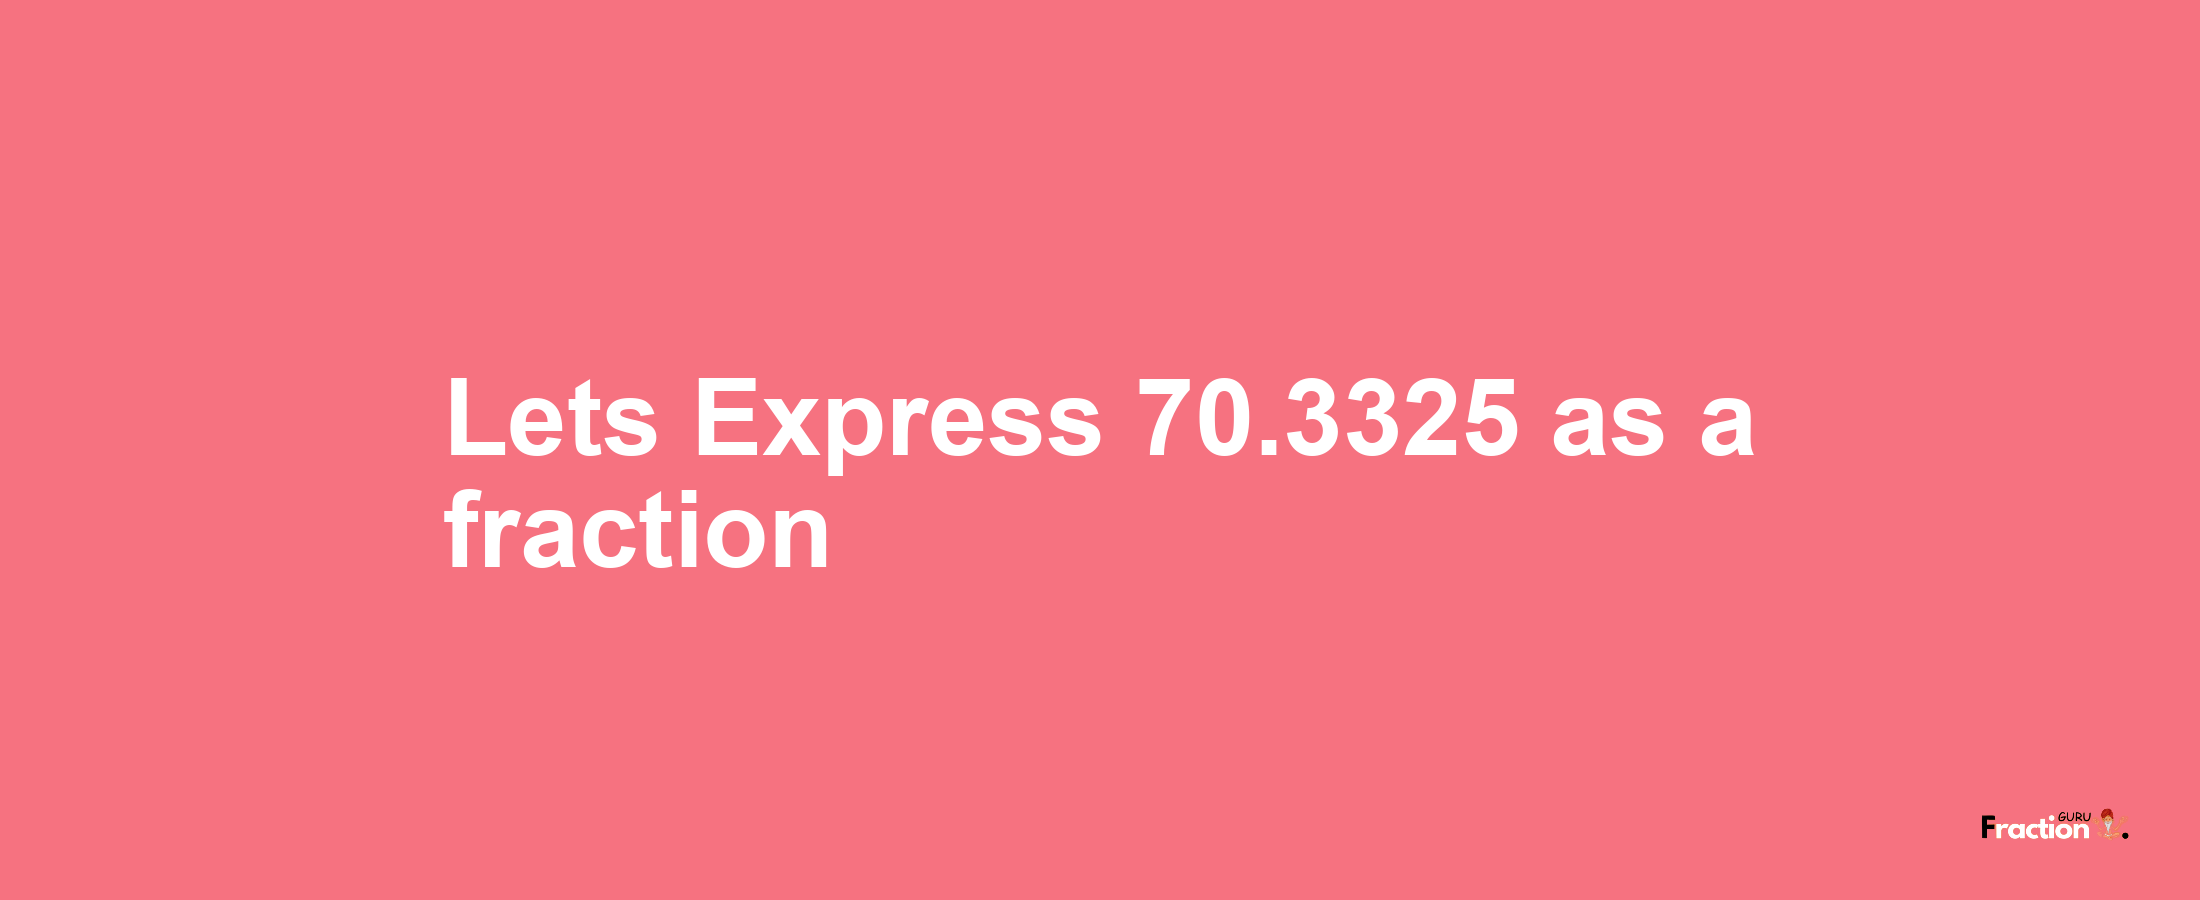 Lets Express 70.3325 as afraction